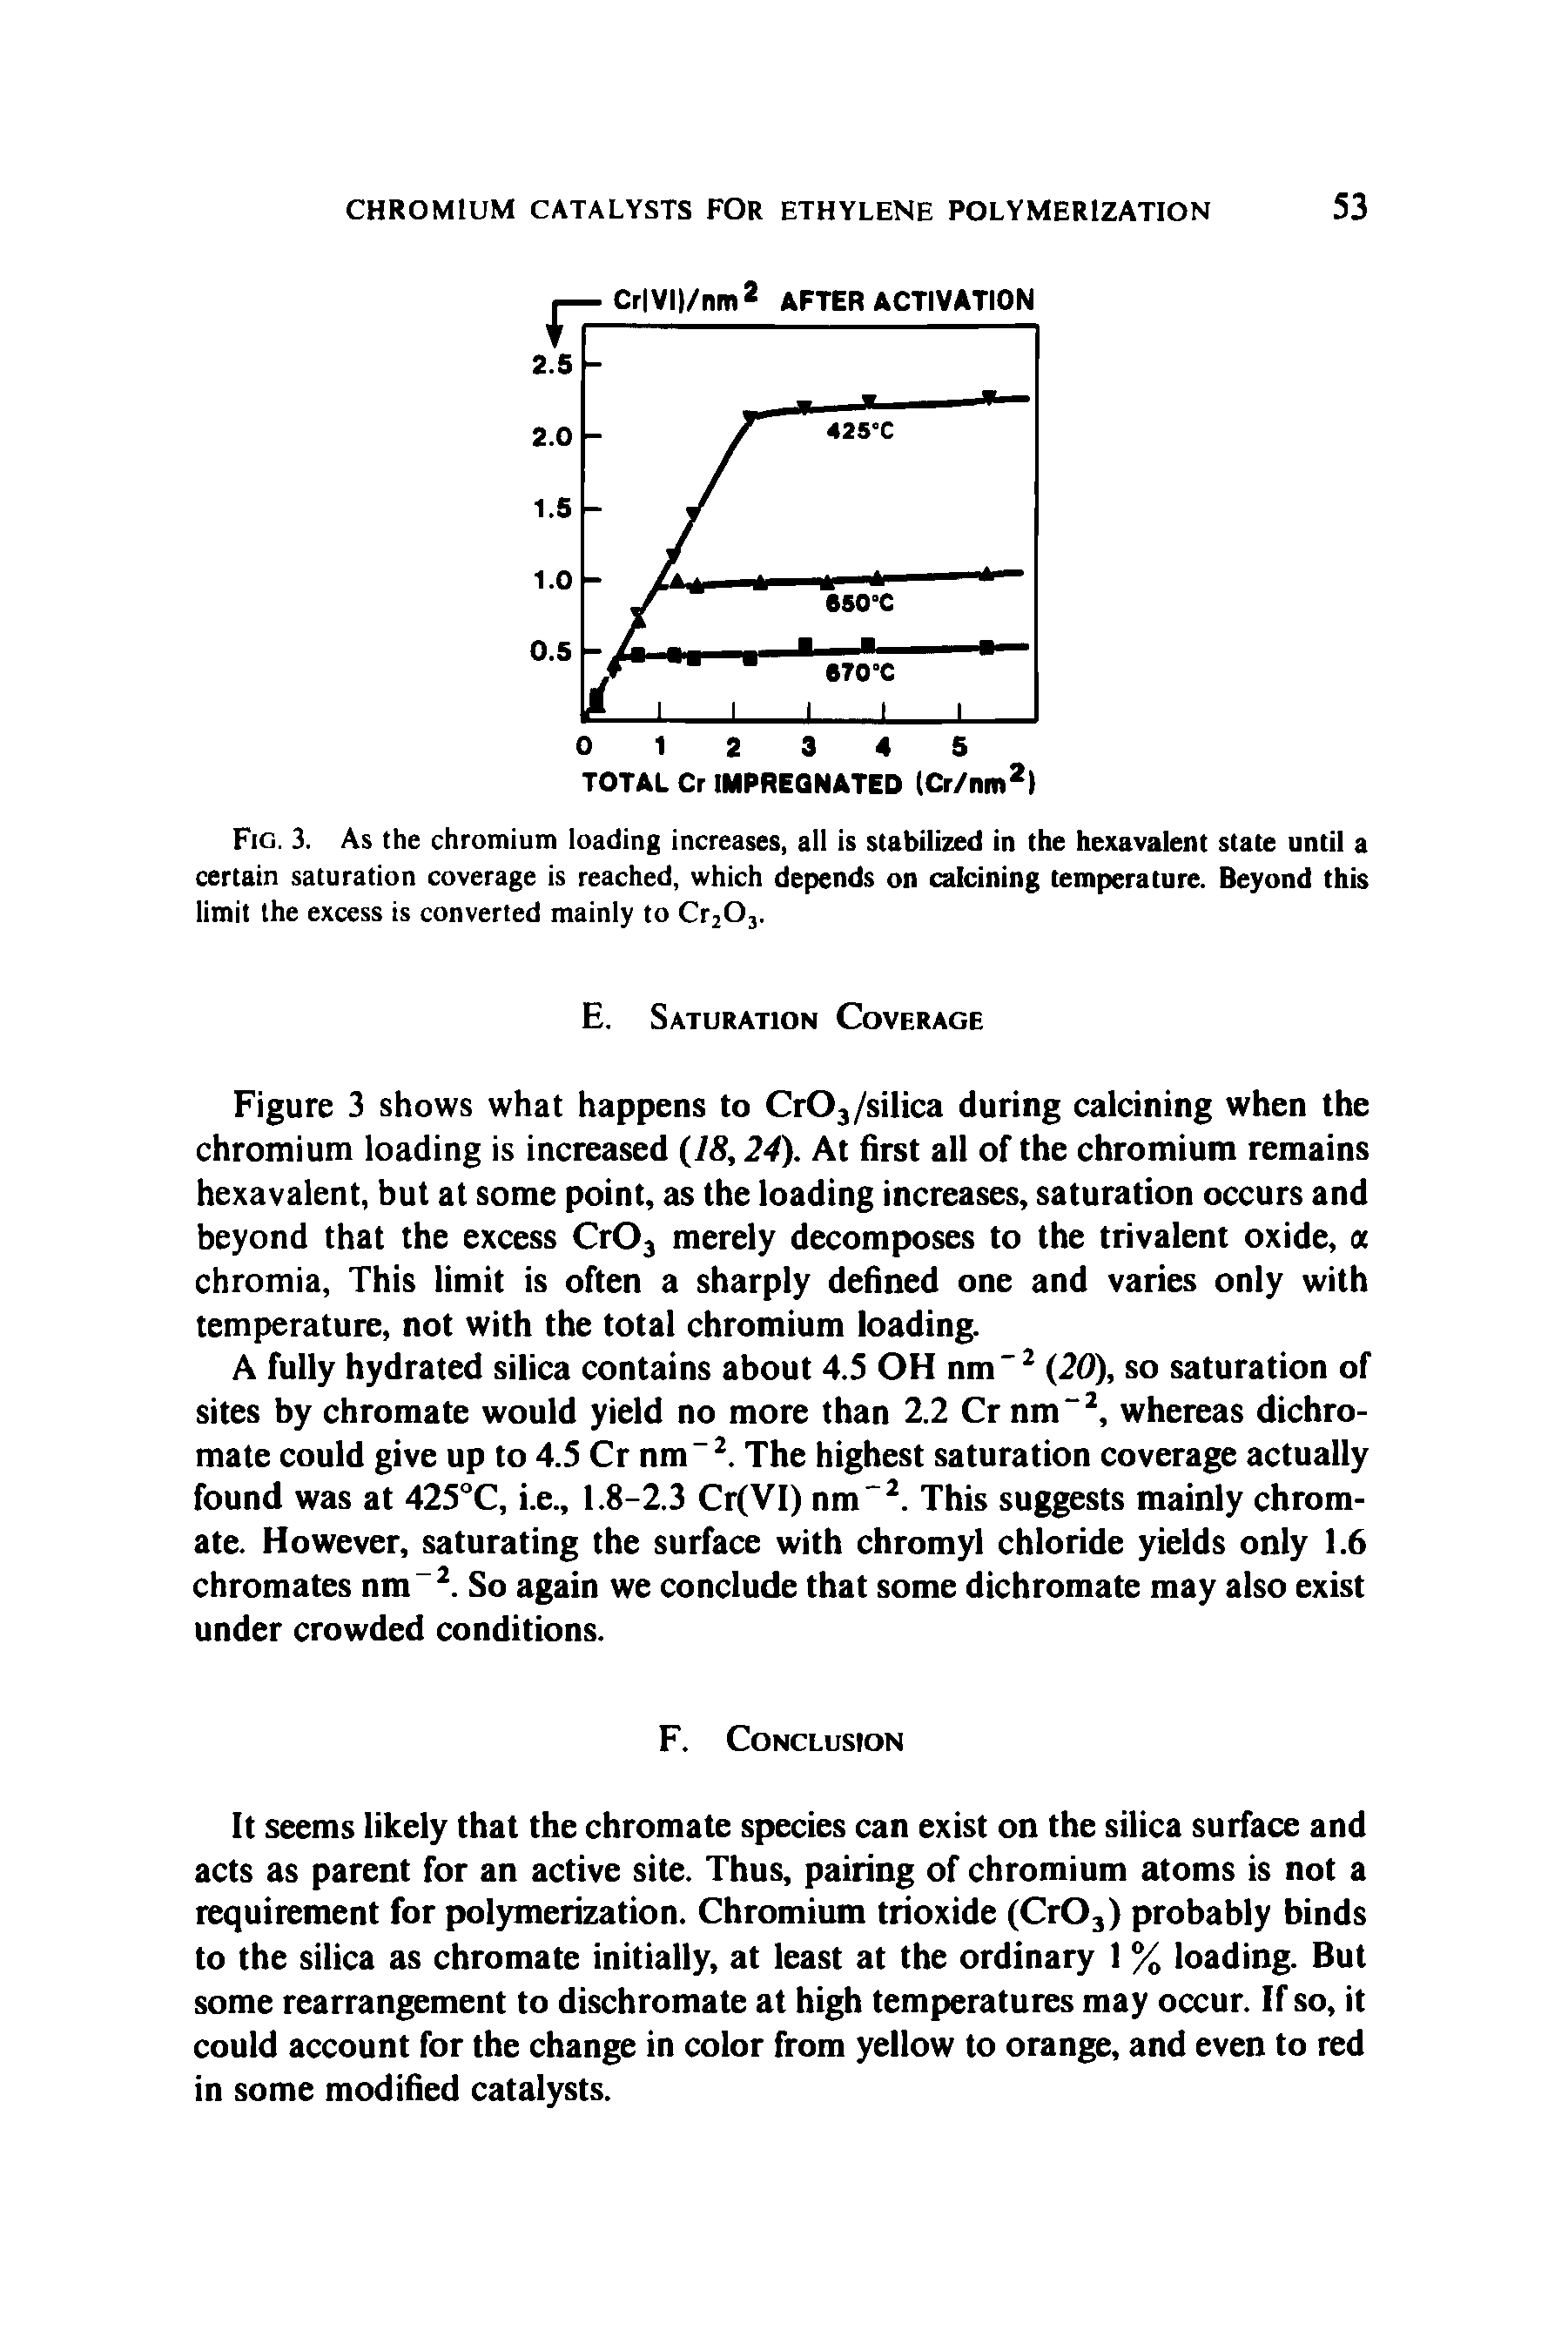 Fig. 3. As the chromium loading increases, all is stabilized in the hexavalent state until a certain saturation coverage is reached, which depends on calcining temperature. Beyond this limit the excess is converted mainly to Cr203.